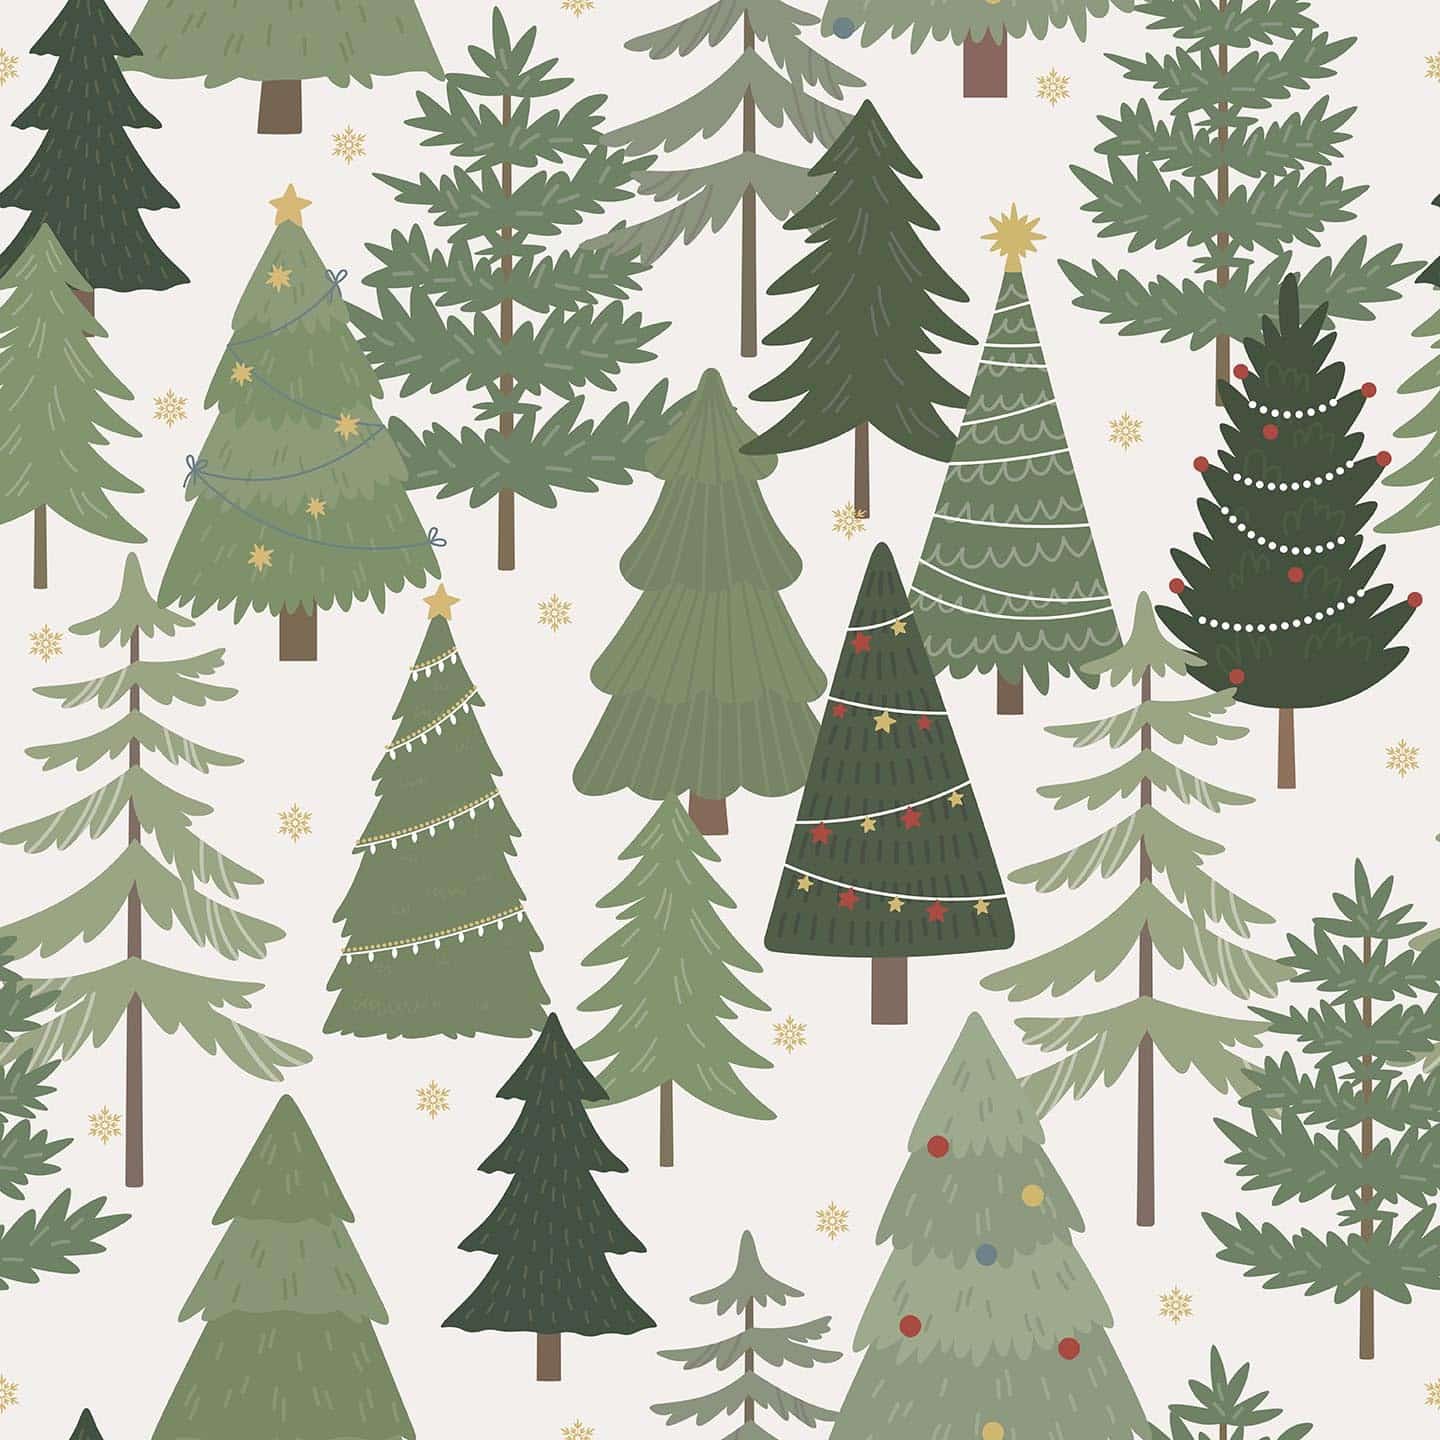 Colorful Christmas tree wallpaper - Peel and Stick or Non-Pasted | Save 25%